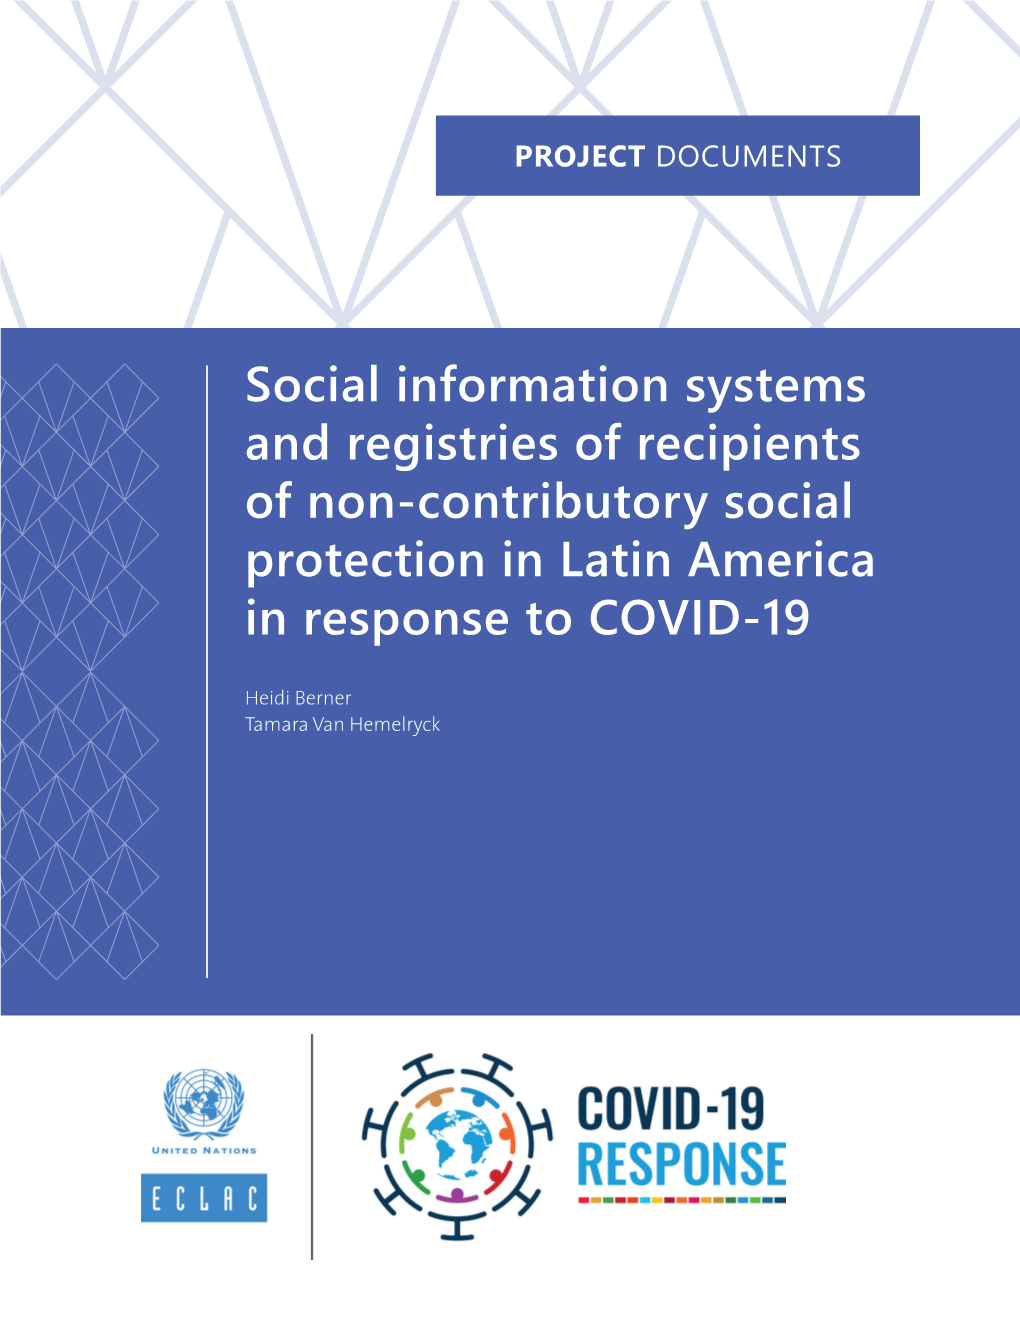 Social Information Systems and Registries of Recipients of Non-Contributory Social Protection in Latin America in Response to COVID-19